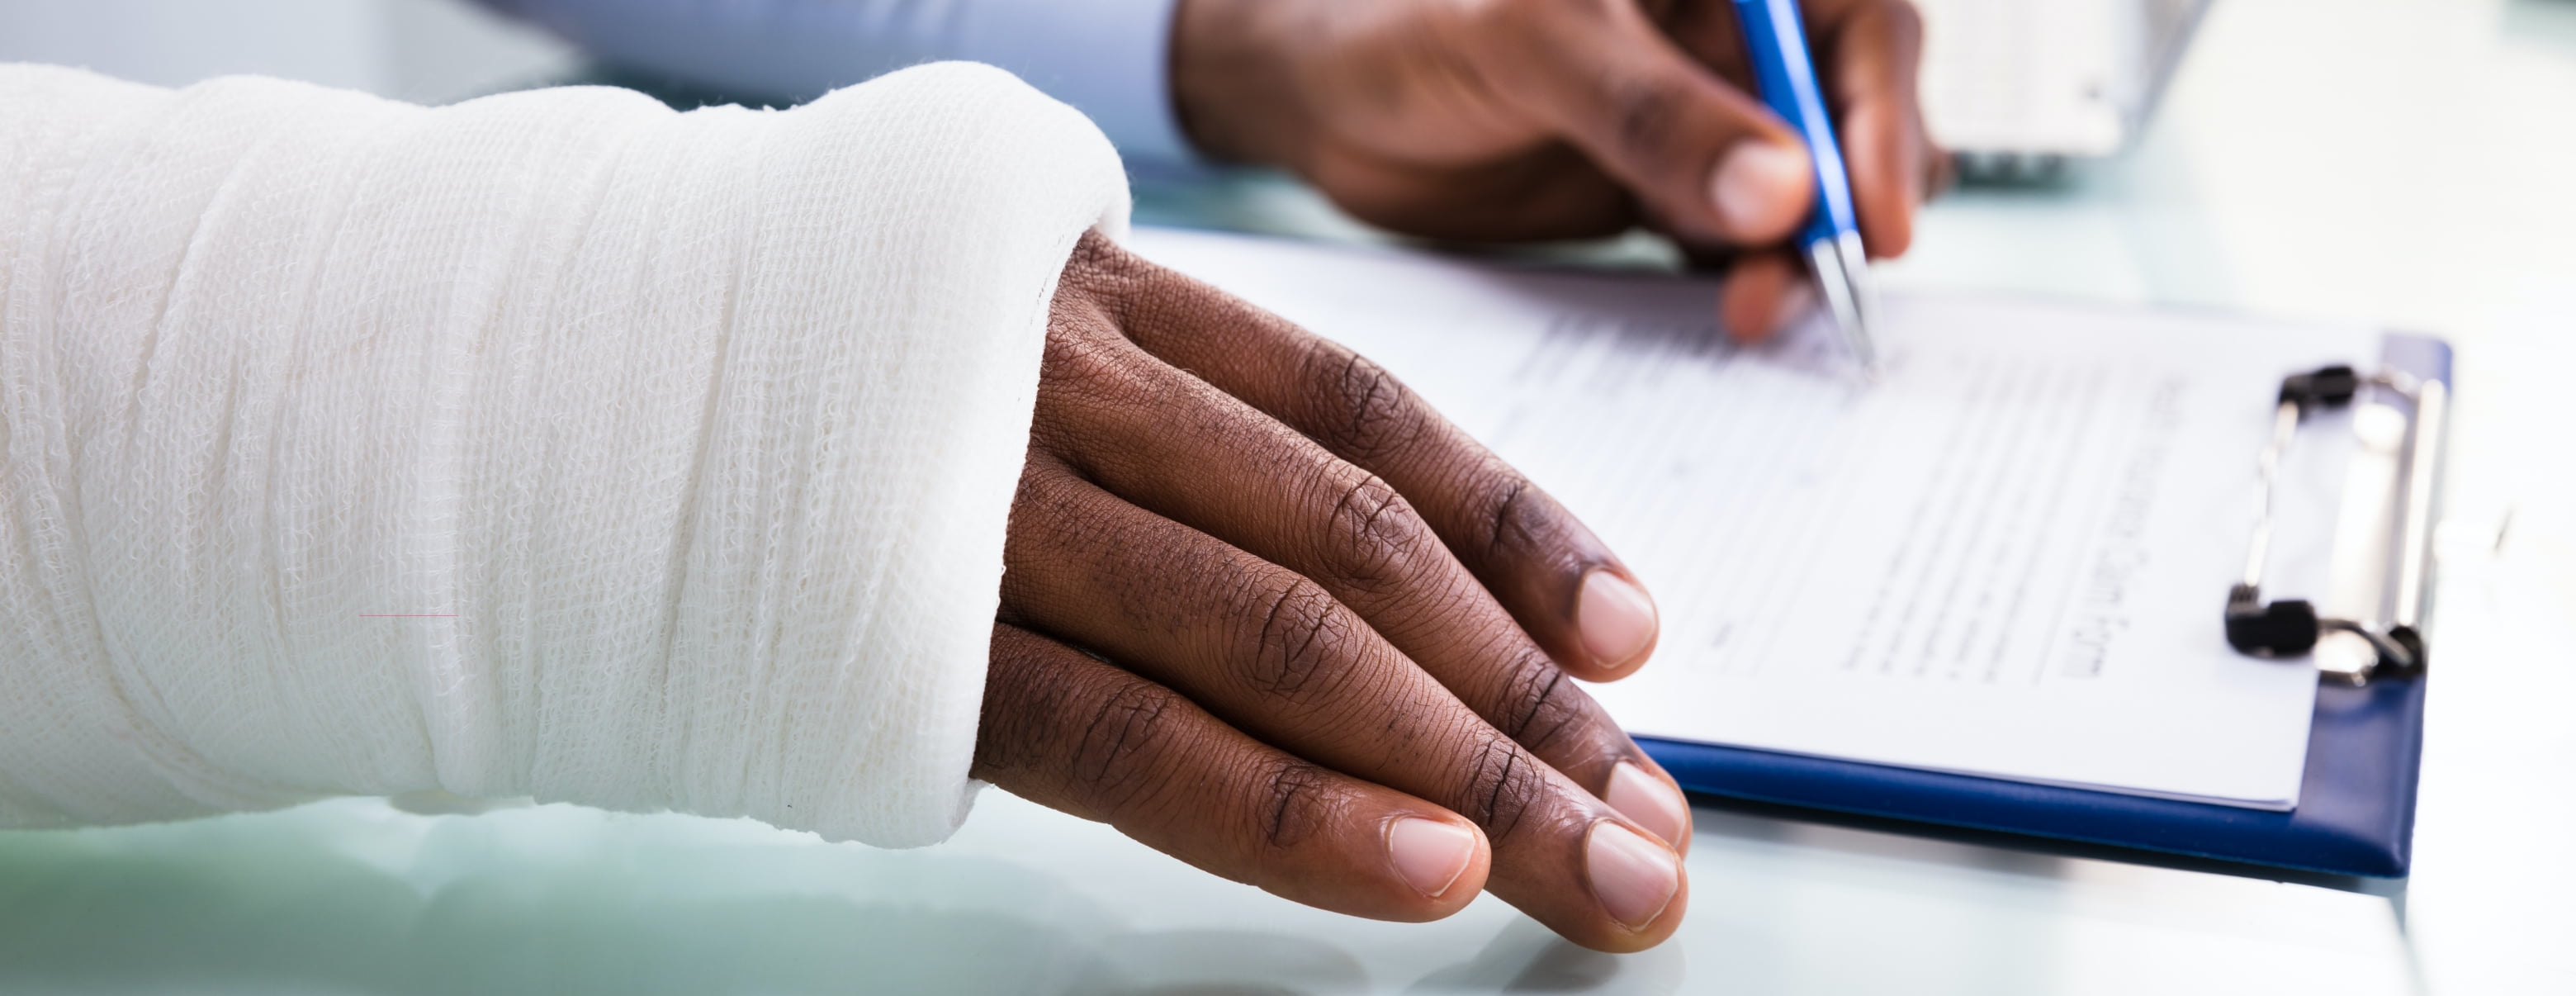 Injured employee with hand in cast - workers' compensation Idaho